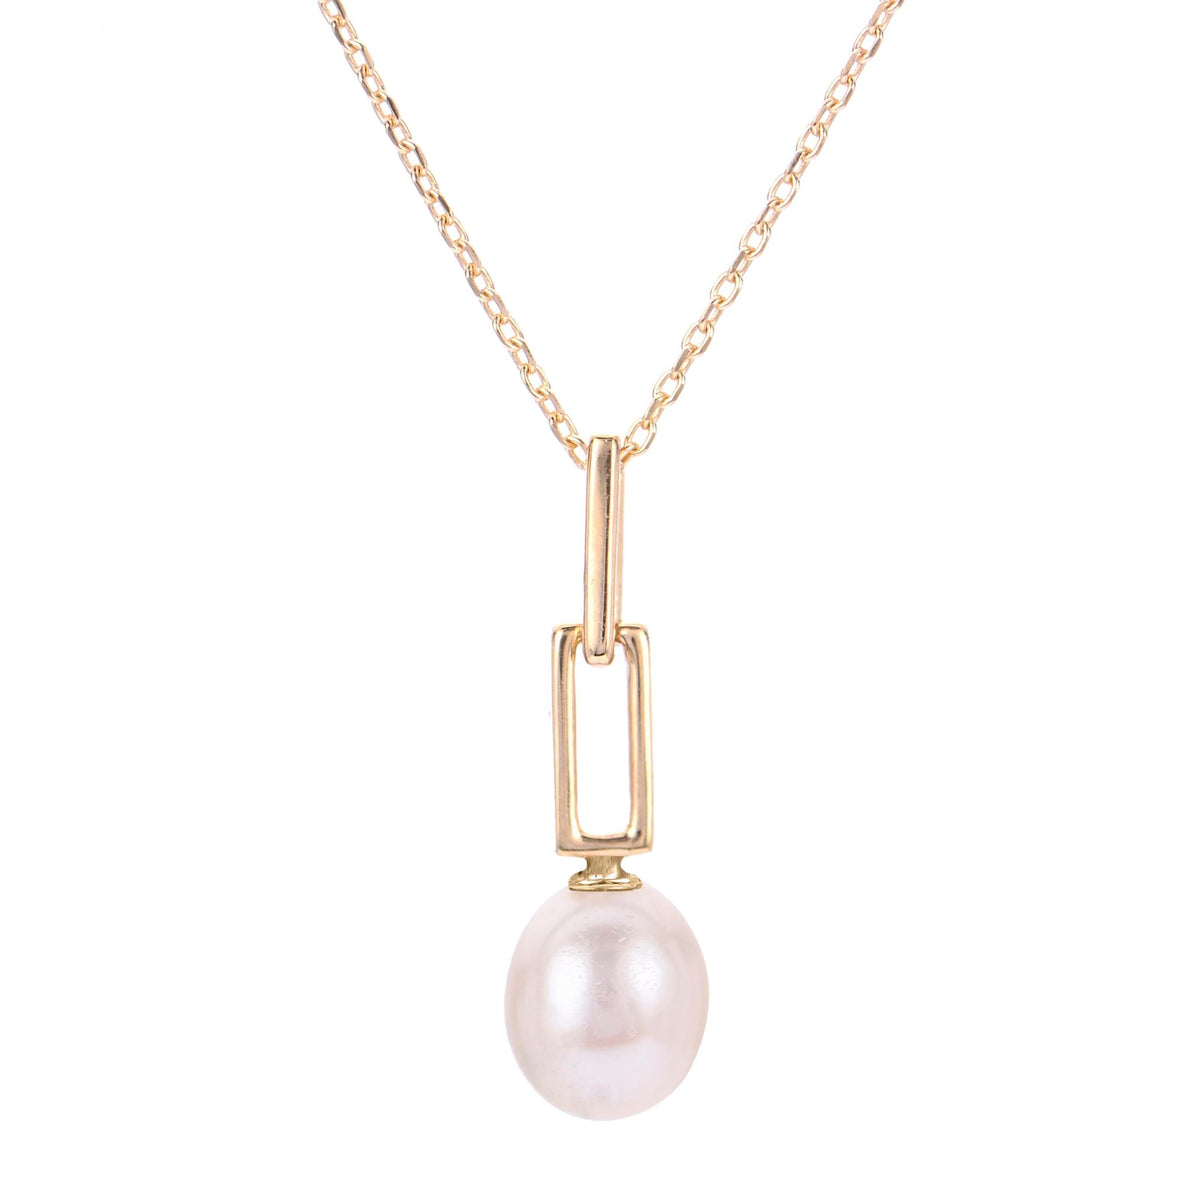 14Kt Yellow Gold Drop Pendant With mm Fresh Water Cultured Pearl